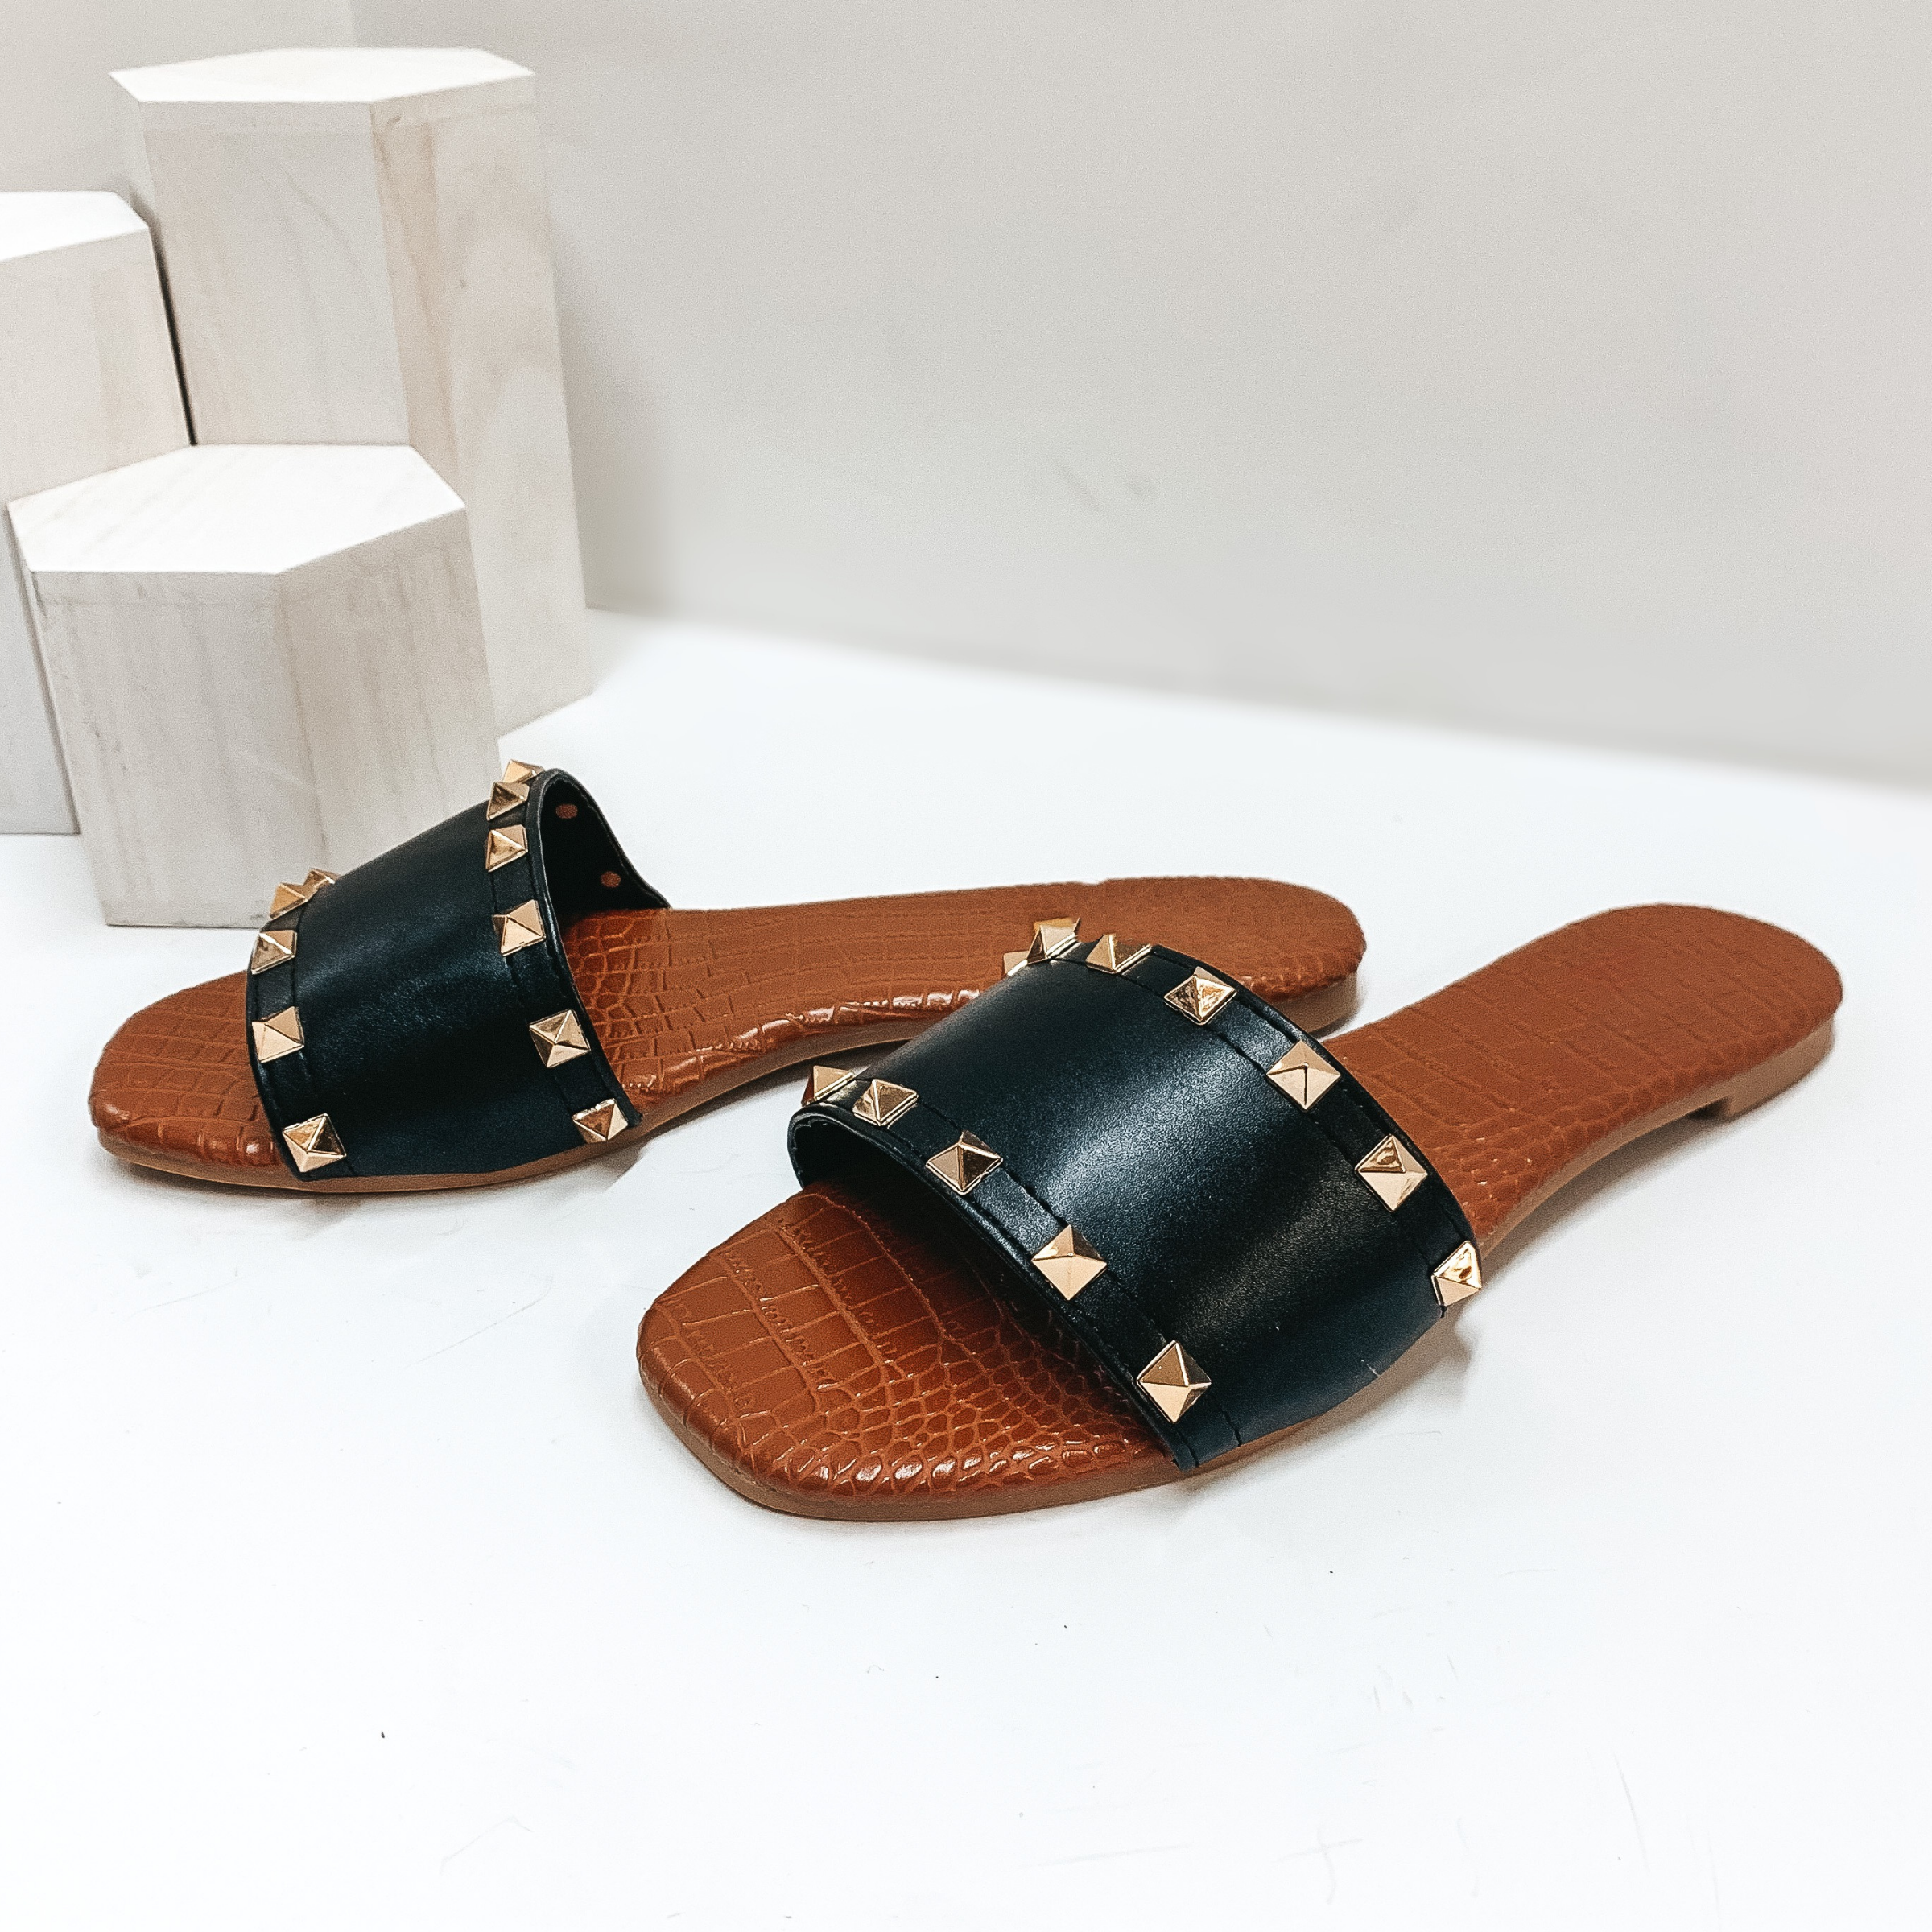 Chic Steps Gold Studded Slide On Sandals with Croc Print Sole in Black - Giddy Up Glamour Boutique